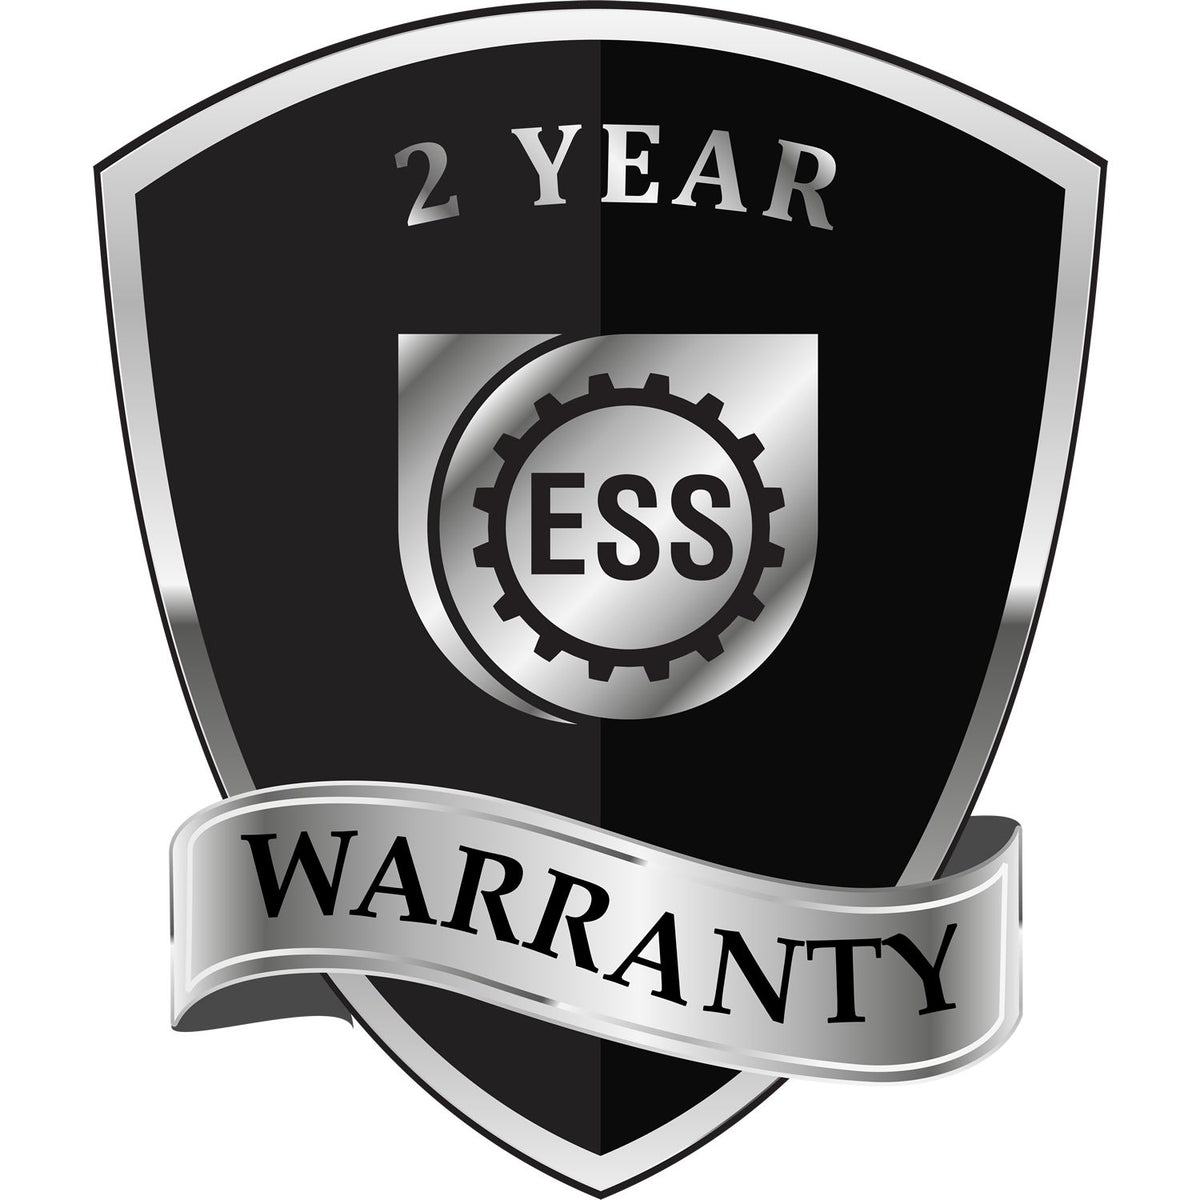 A black and silver badge or emblem showing warranty information for the Hybrid Texas Geologist Seal